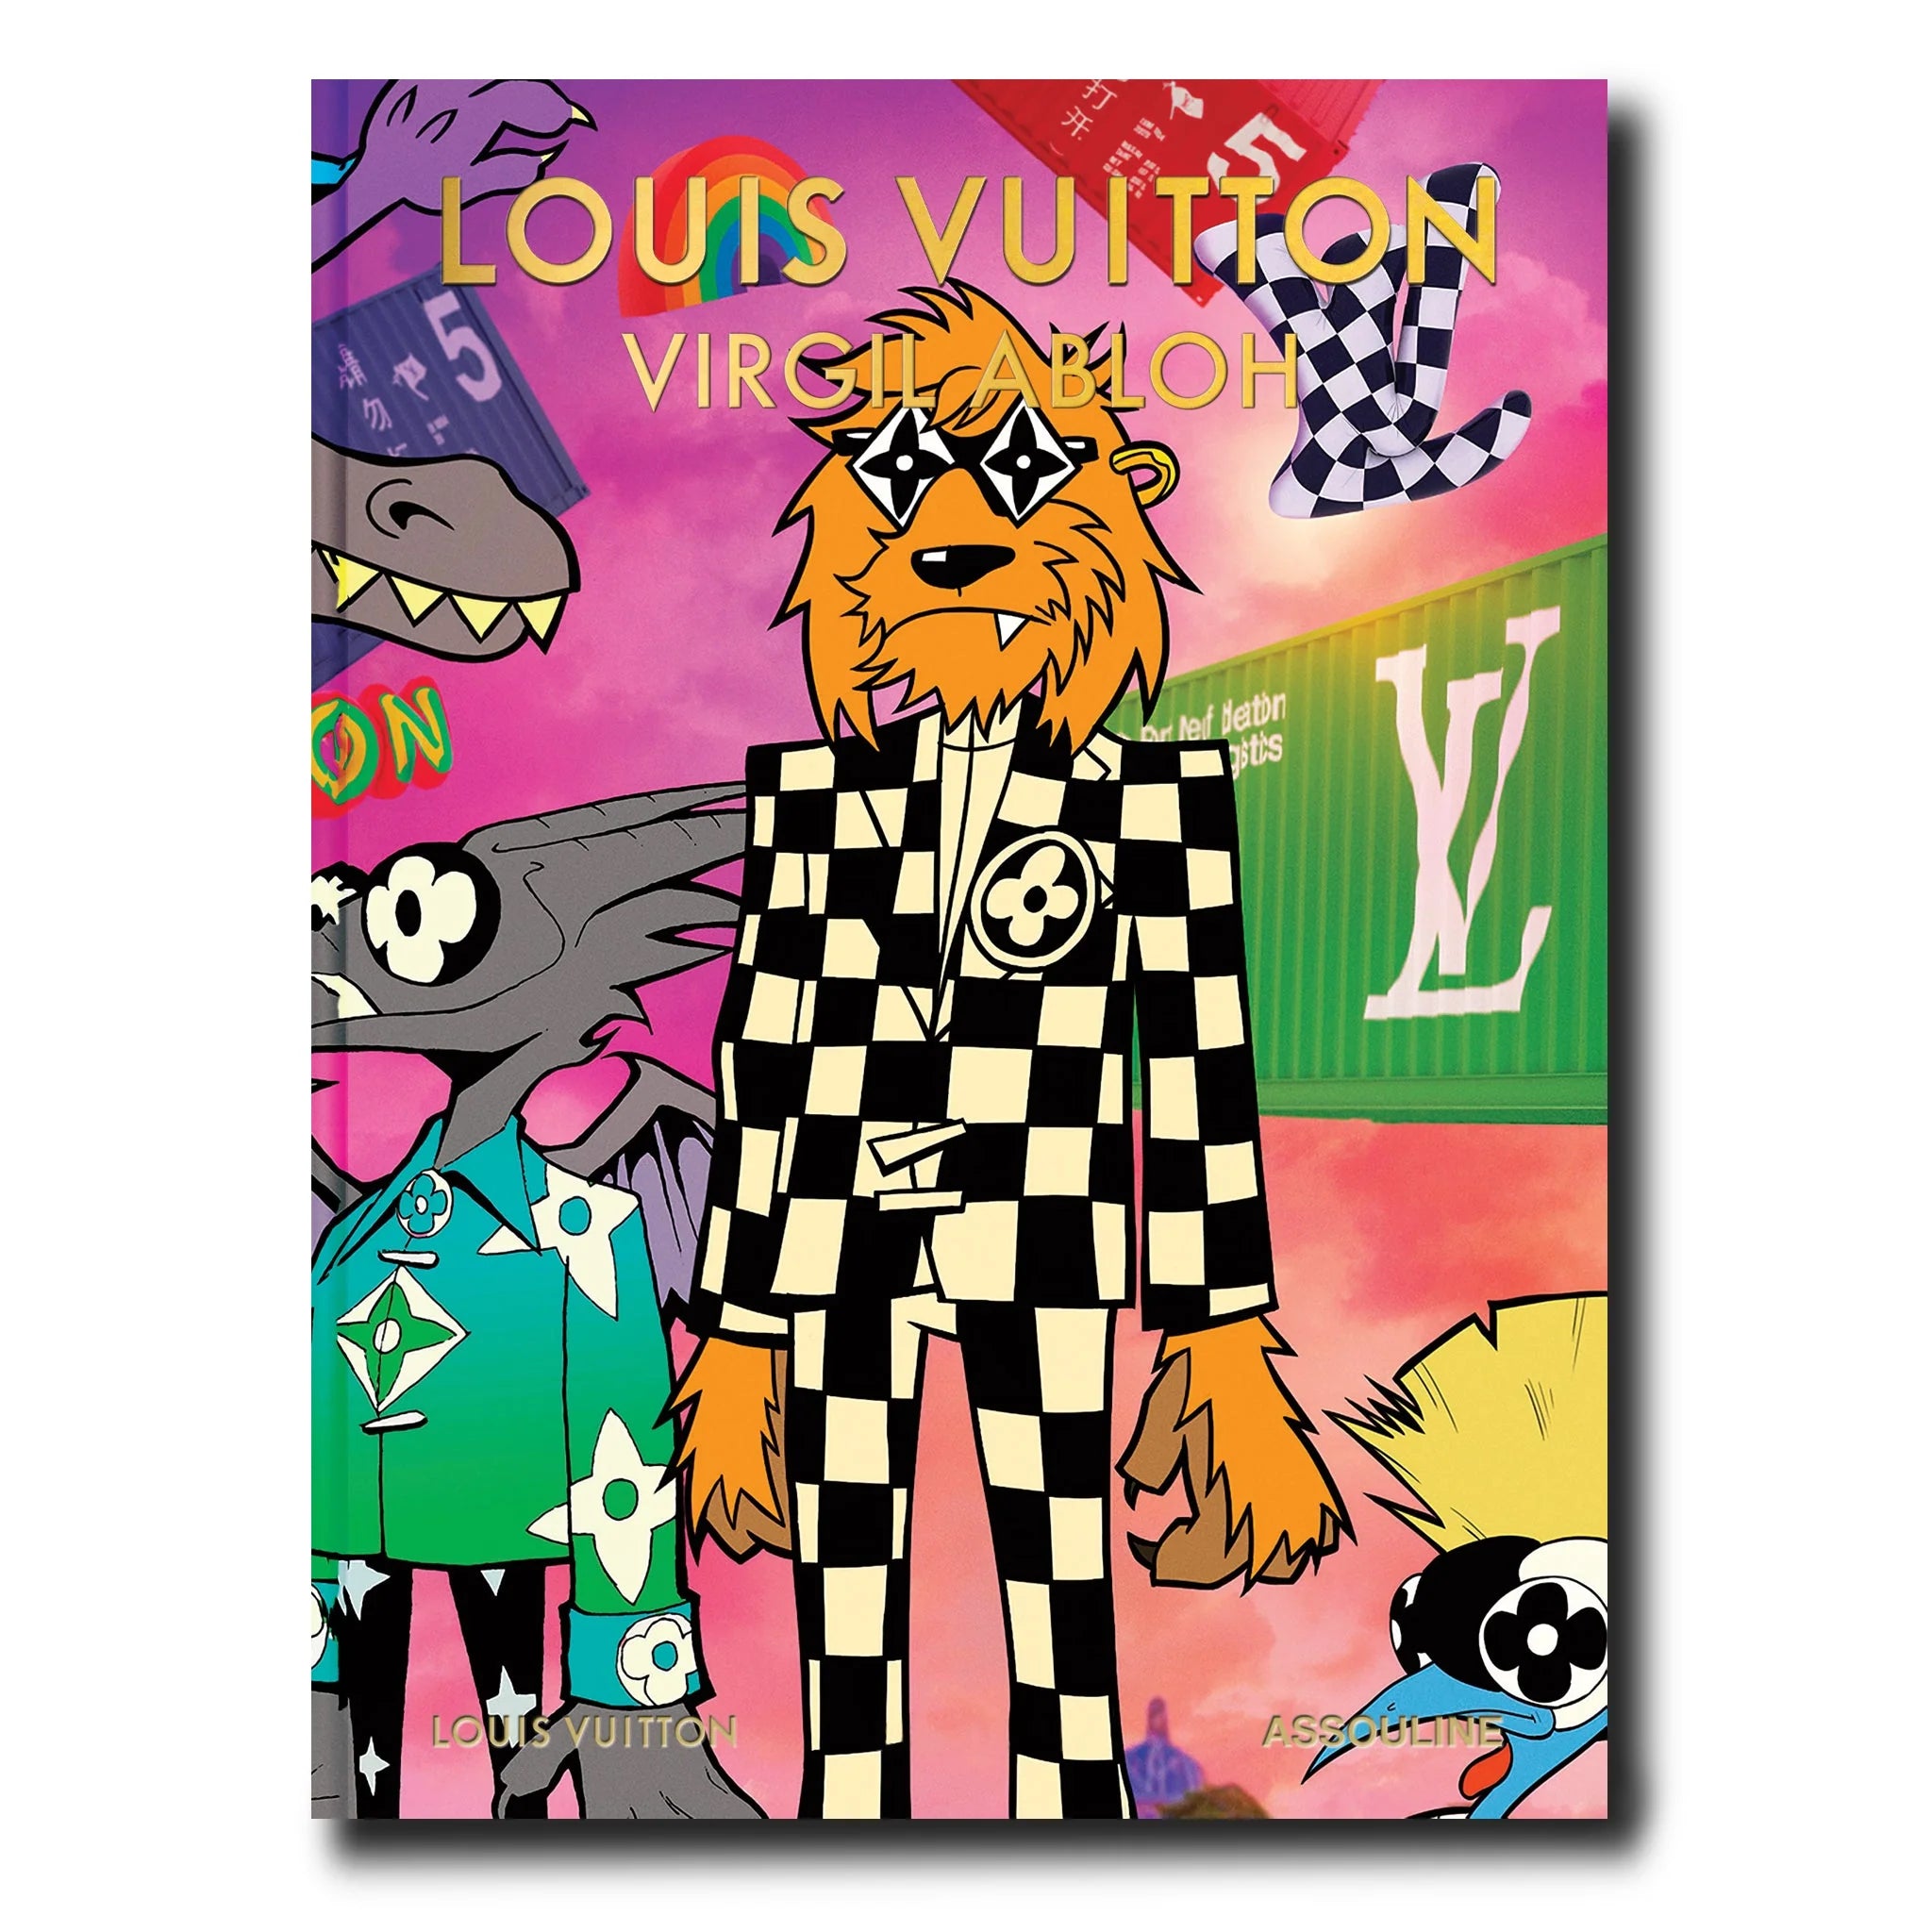 Louis Vuitton, books and posters transformed in the Pre-Fall 2020